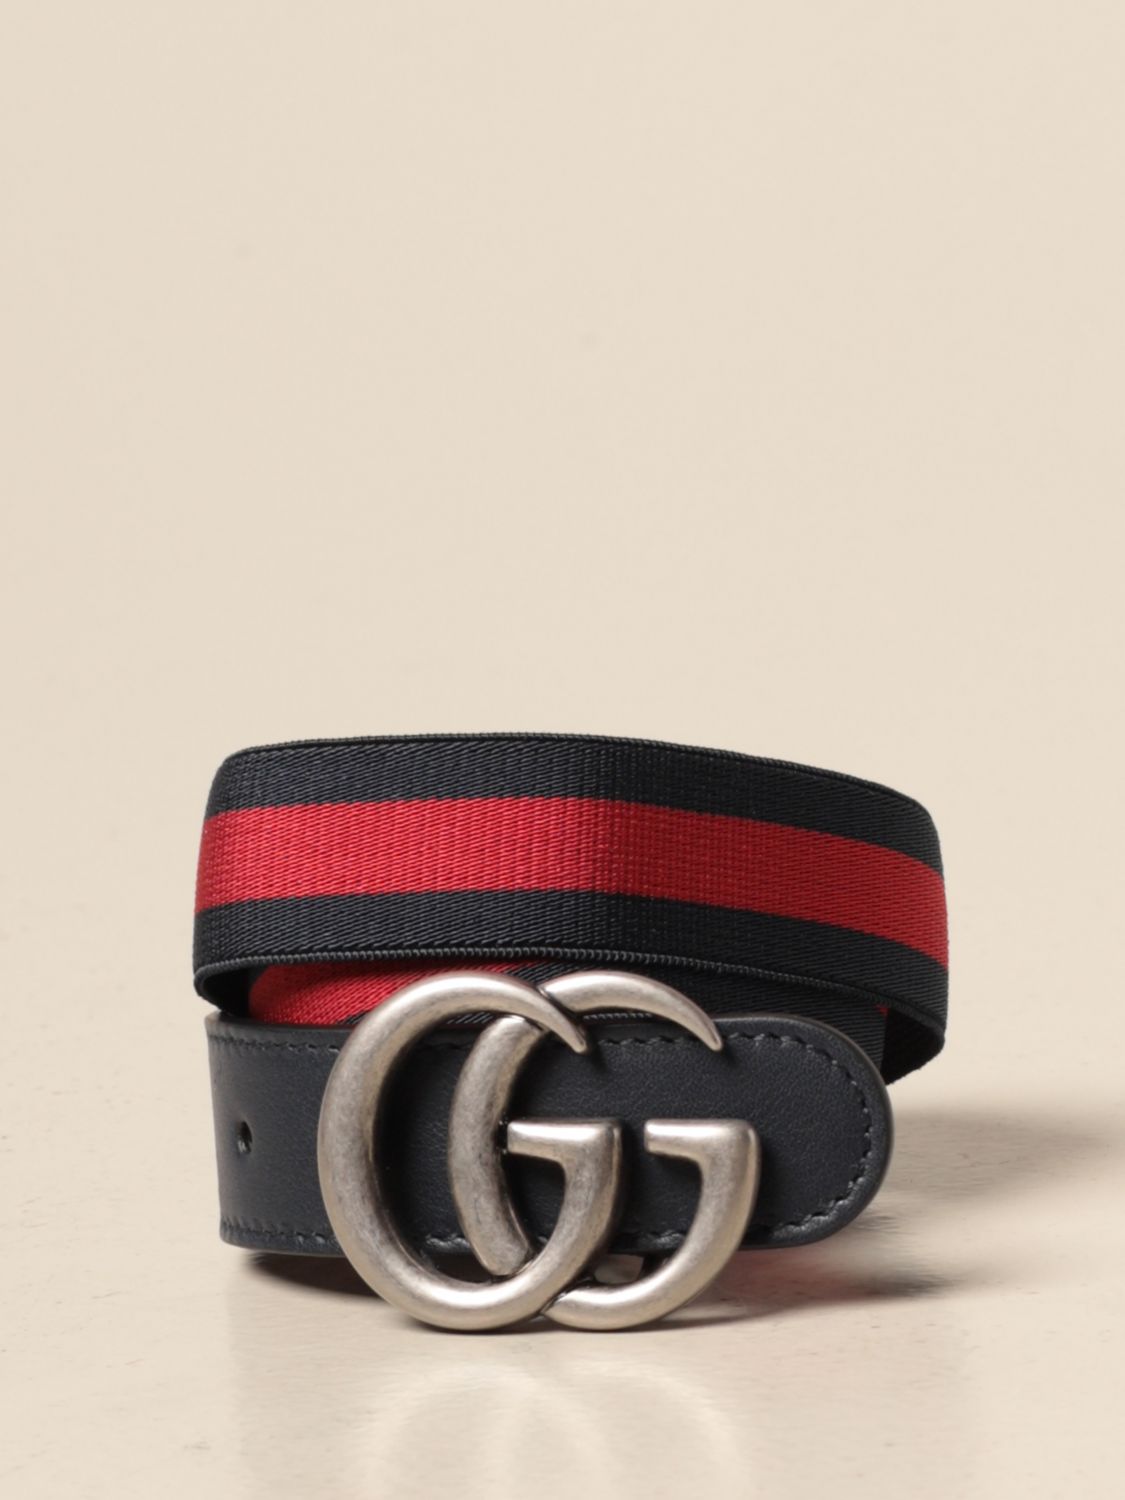 red gucci belt for kids